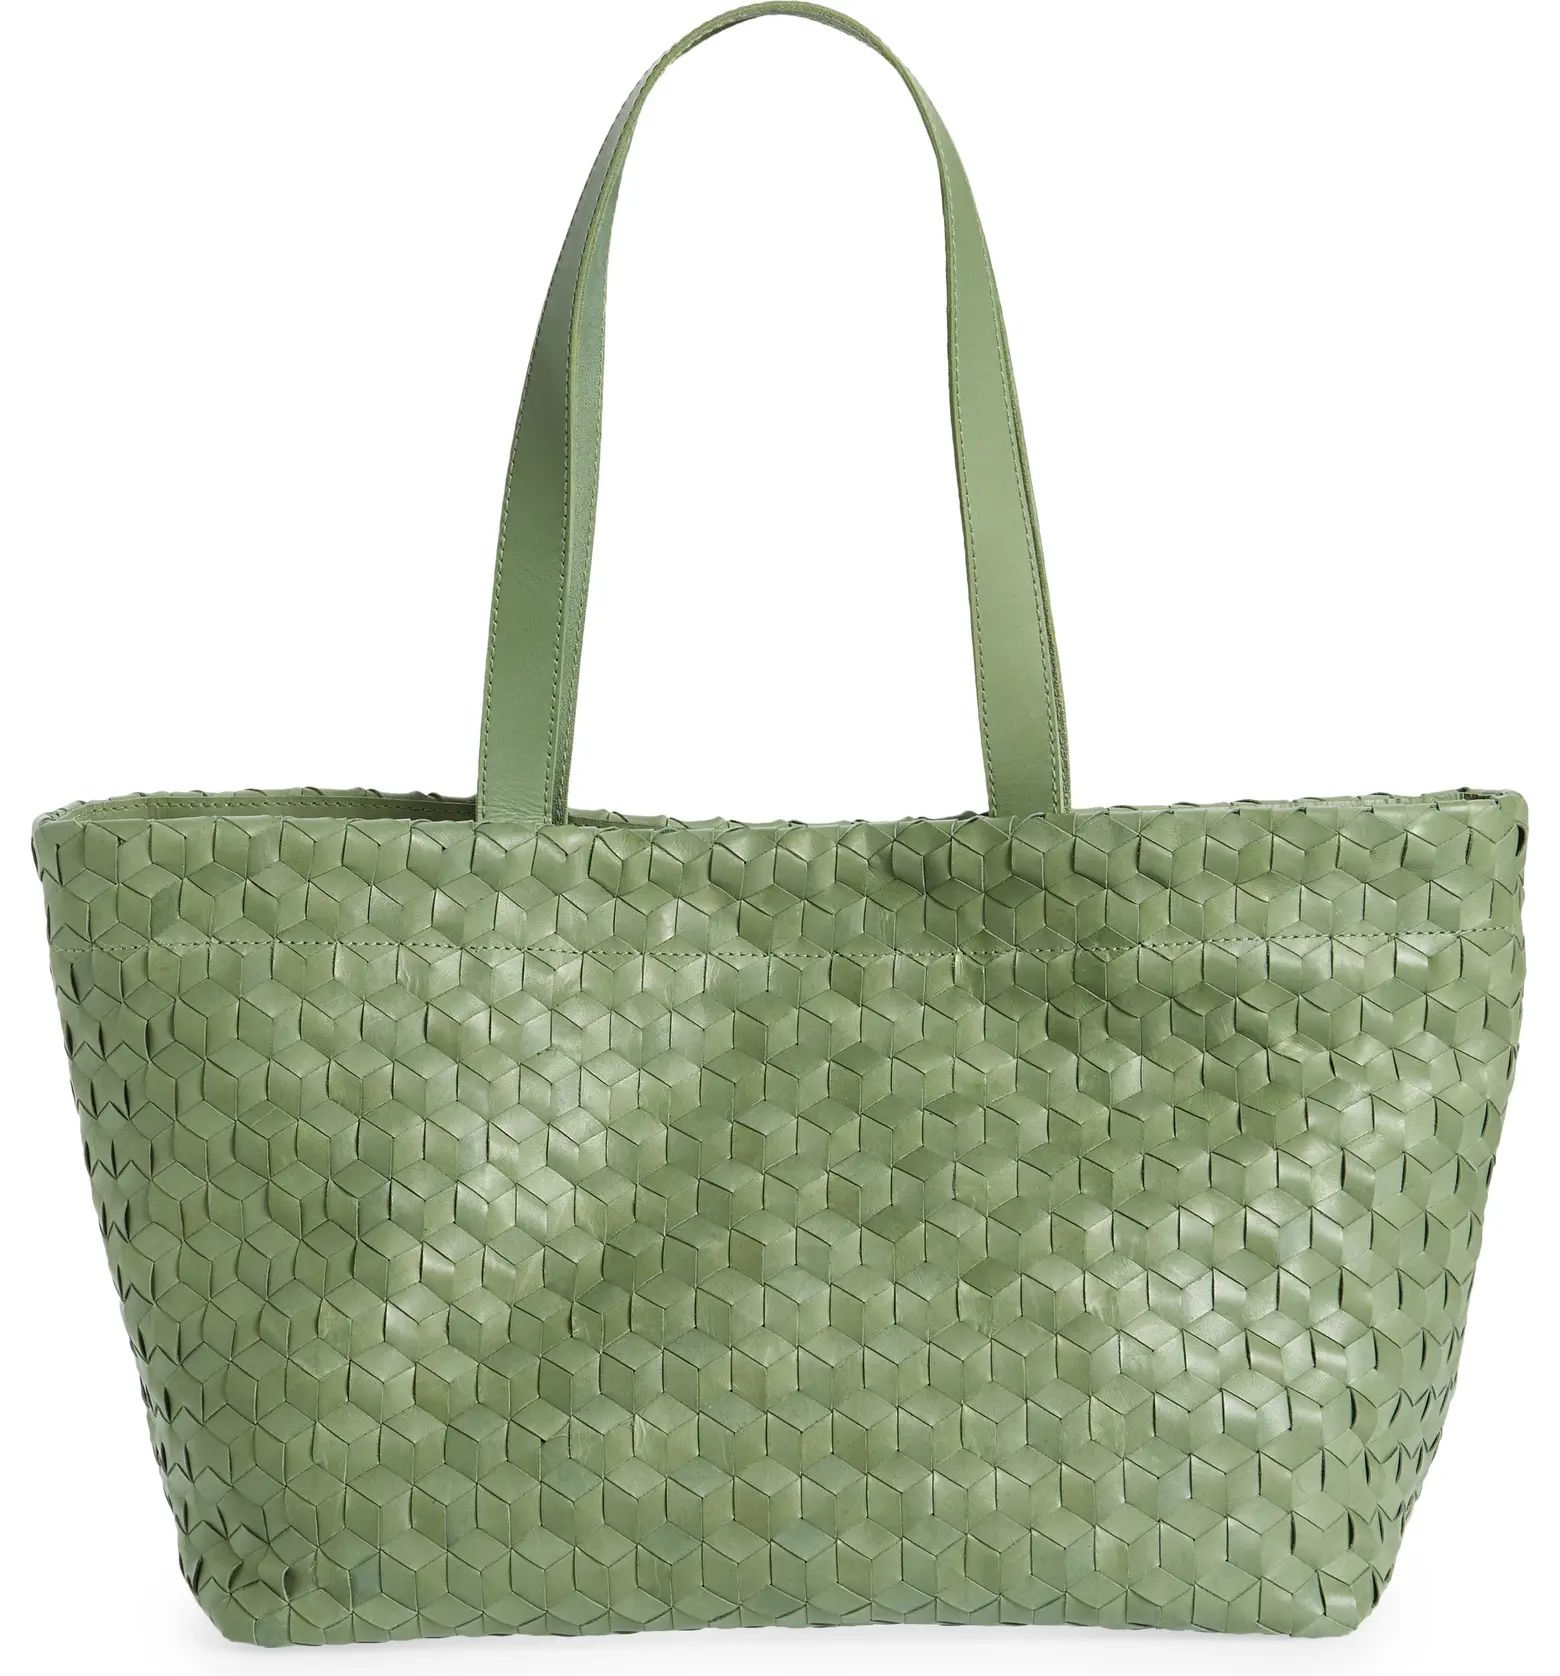 Medium Woven Leather Tote | Nordstrom